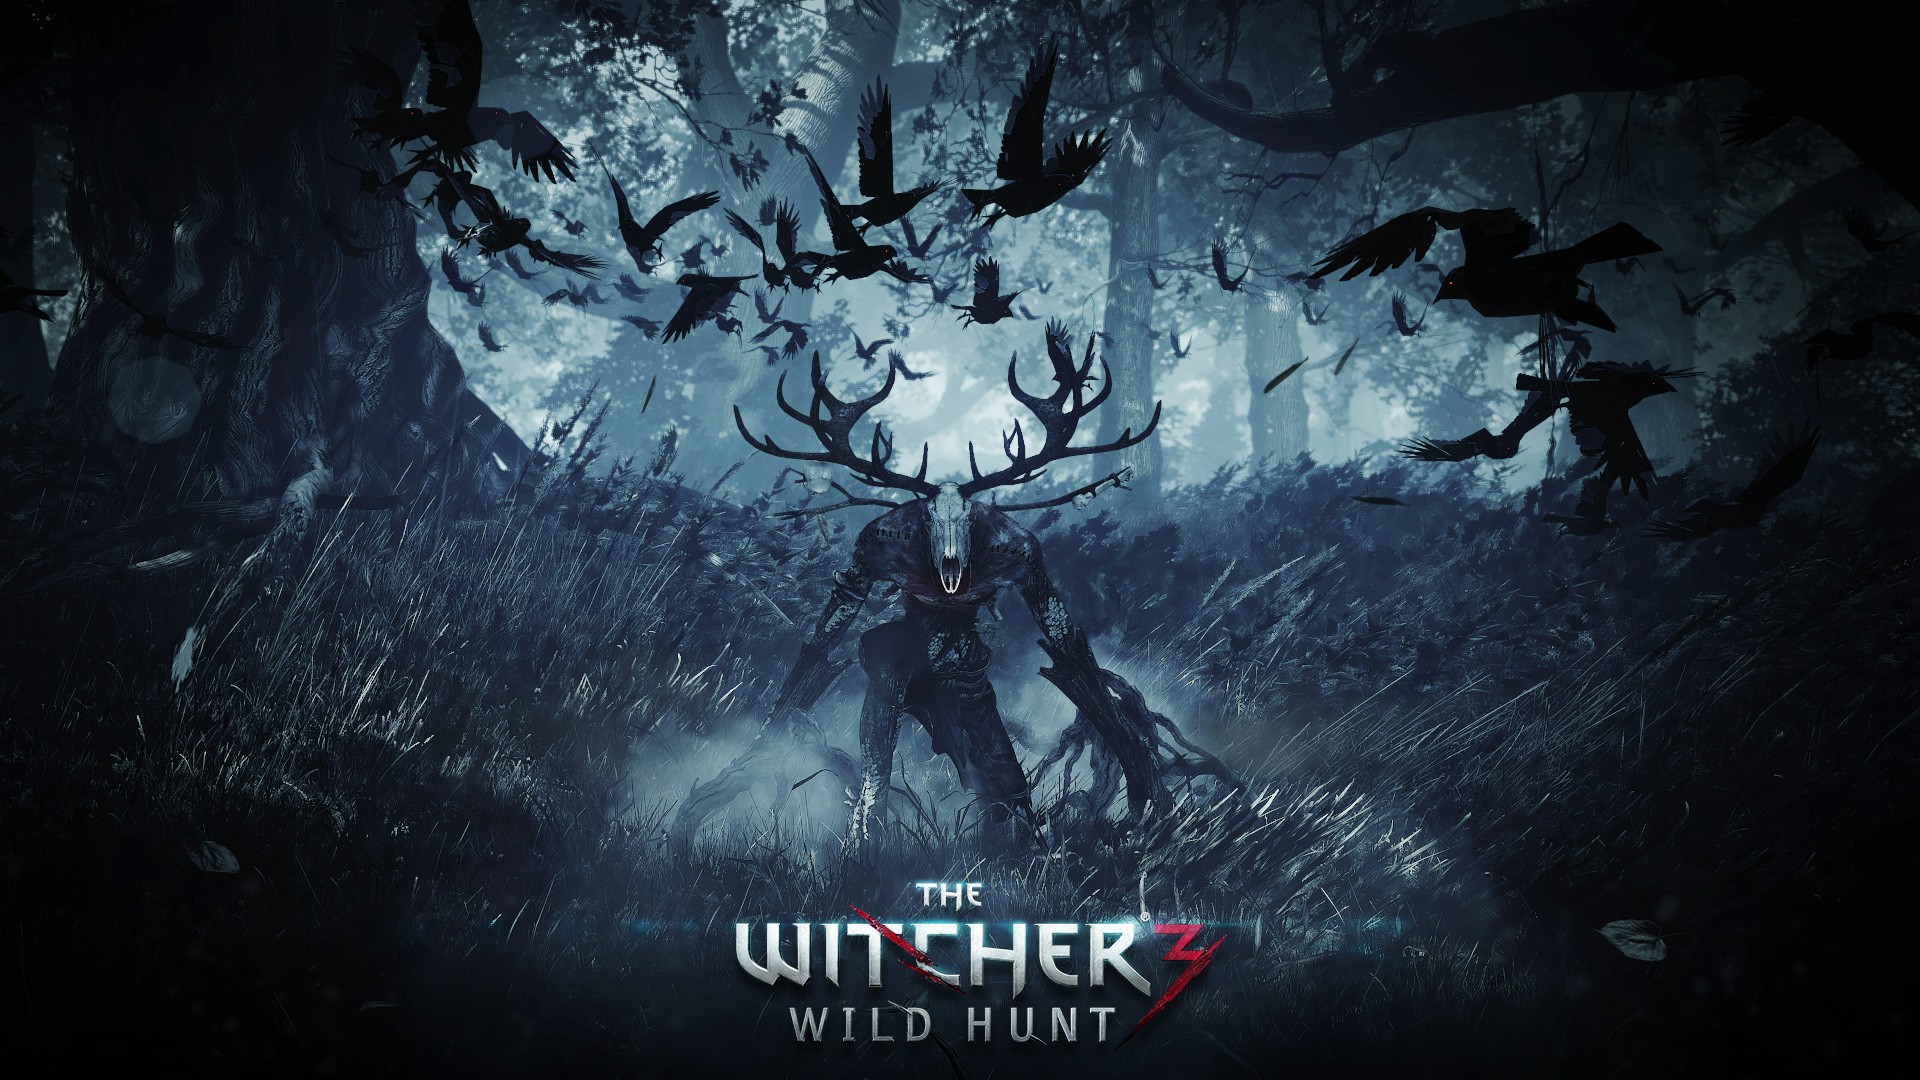 The Witcher, Video games, The Witcher 3: Wild Hunt Wallpaper